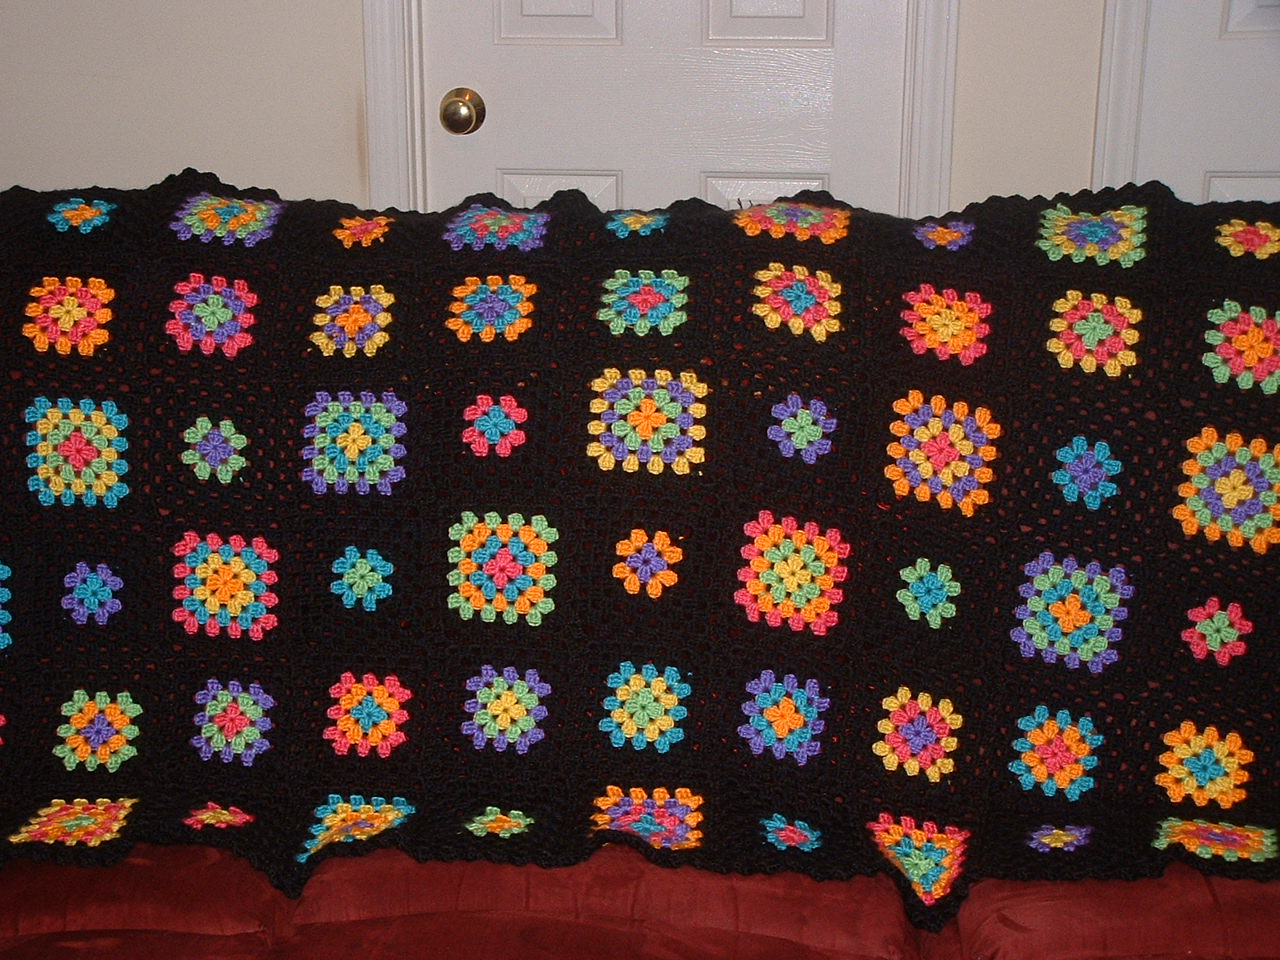 Chain Reaction Crochet Afghan Project from Crochet Me